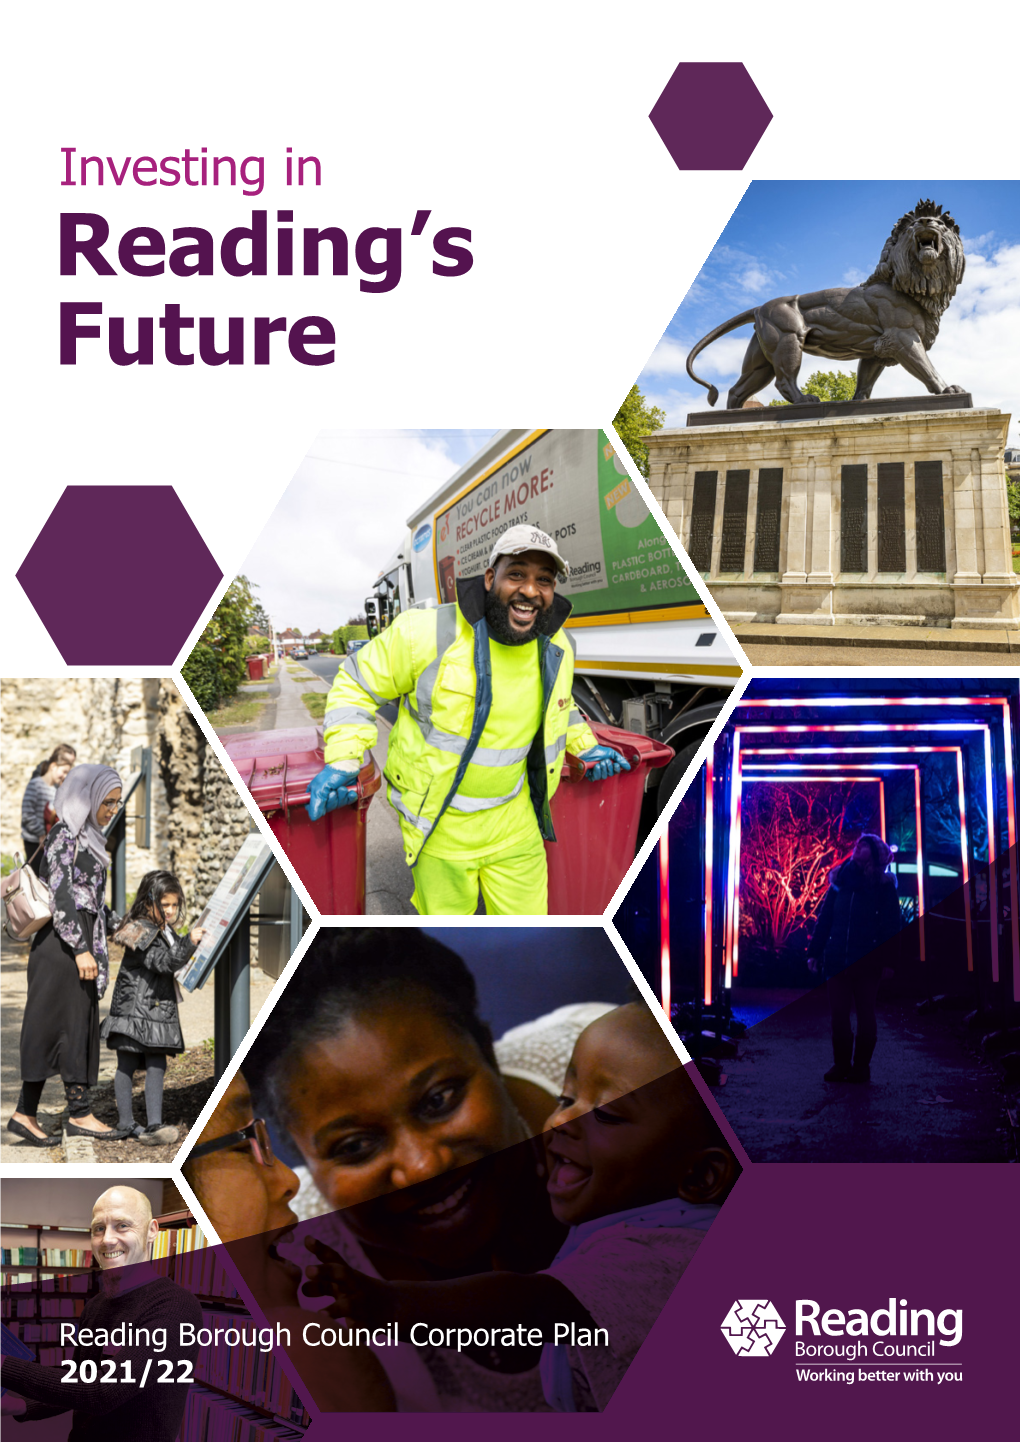 Reading Borough Council Corporate Plan 2021/22 Foreword from Cllr Jason Brock Leader of Reading Borough Council